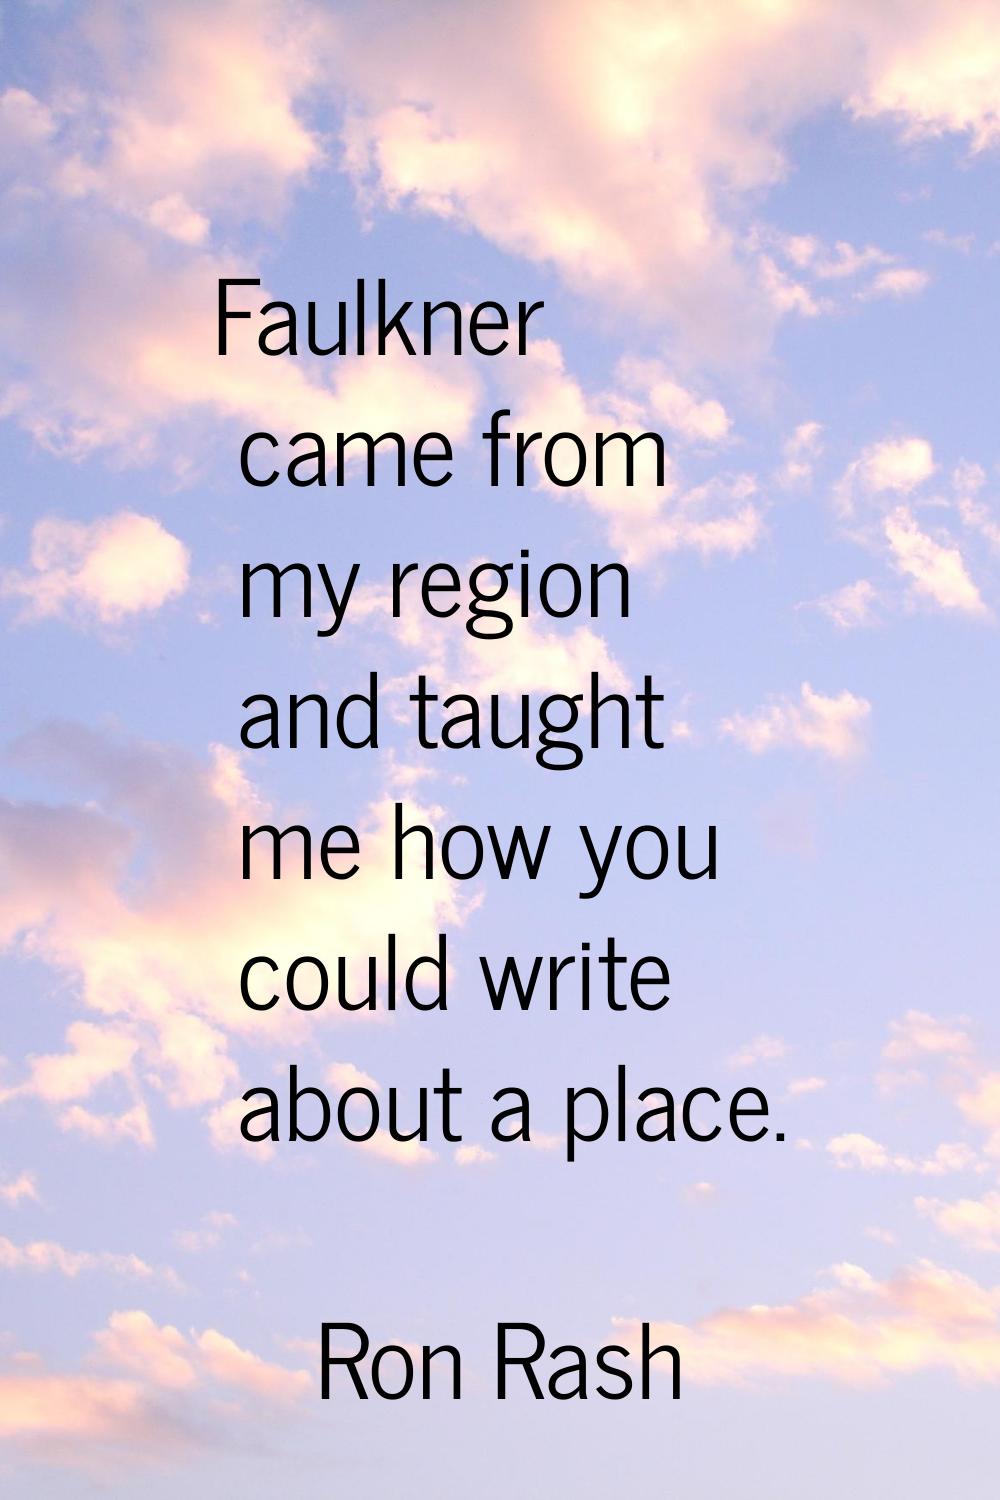 Faulkner came from my region and taught me how you could write about a place.